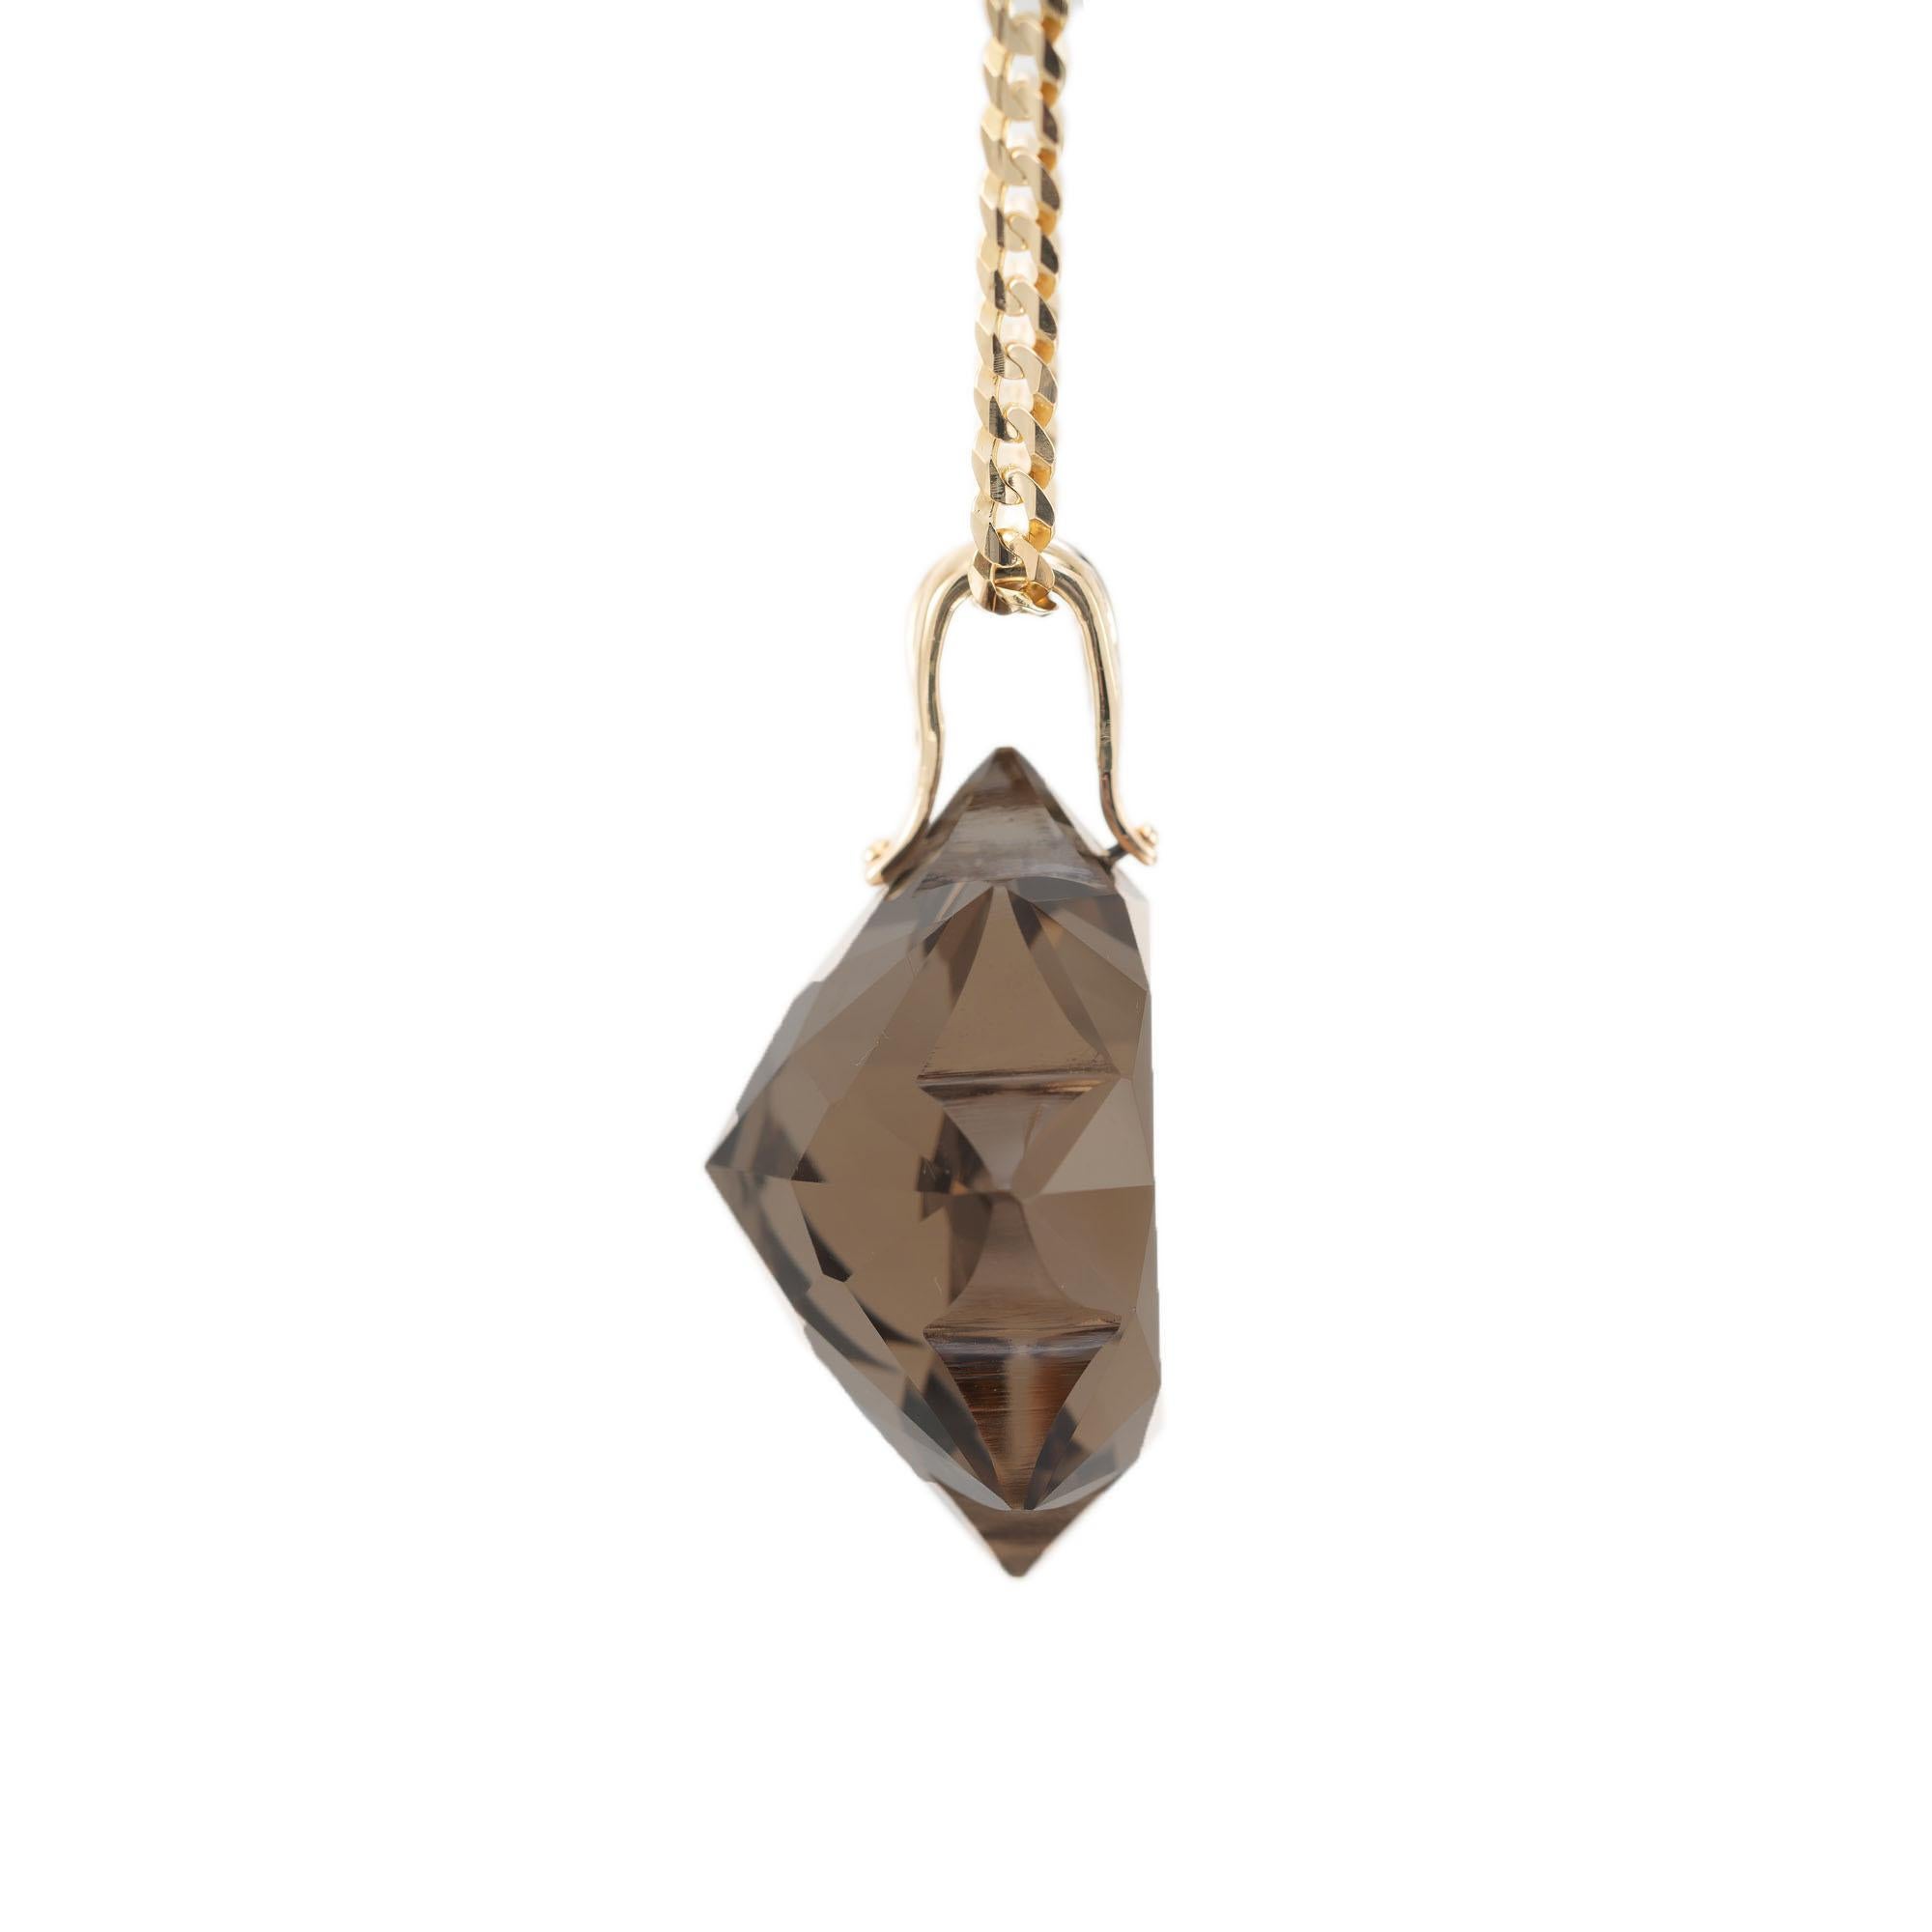 150.00 Carat Star Cut Smoky Quartz Yellow Gold Pendant Necklace In Good Condition For Sale In Stamford, CT